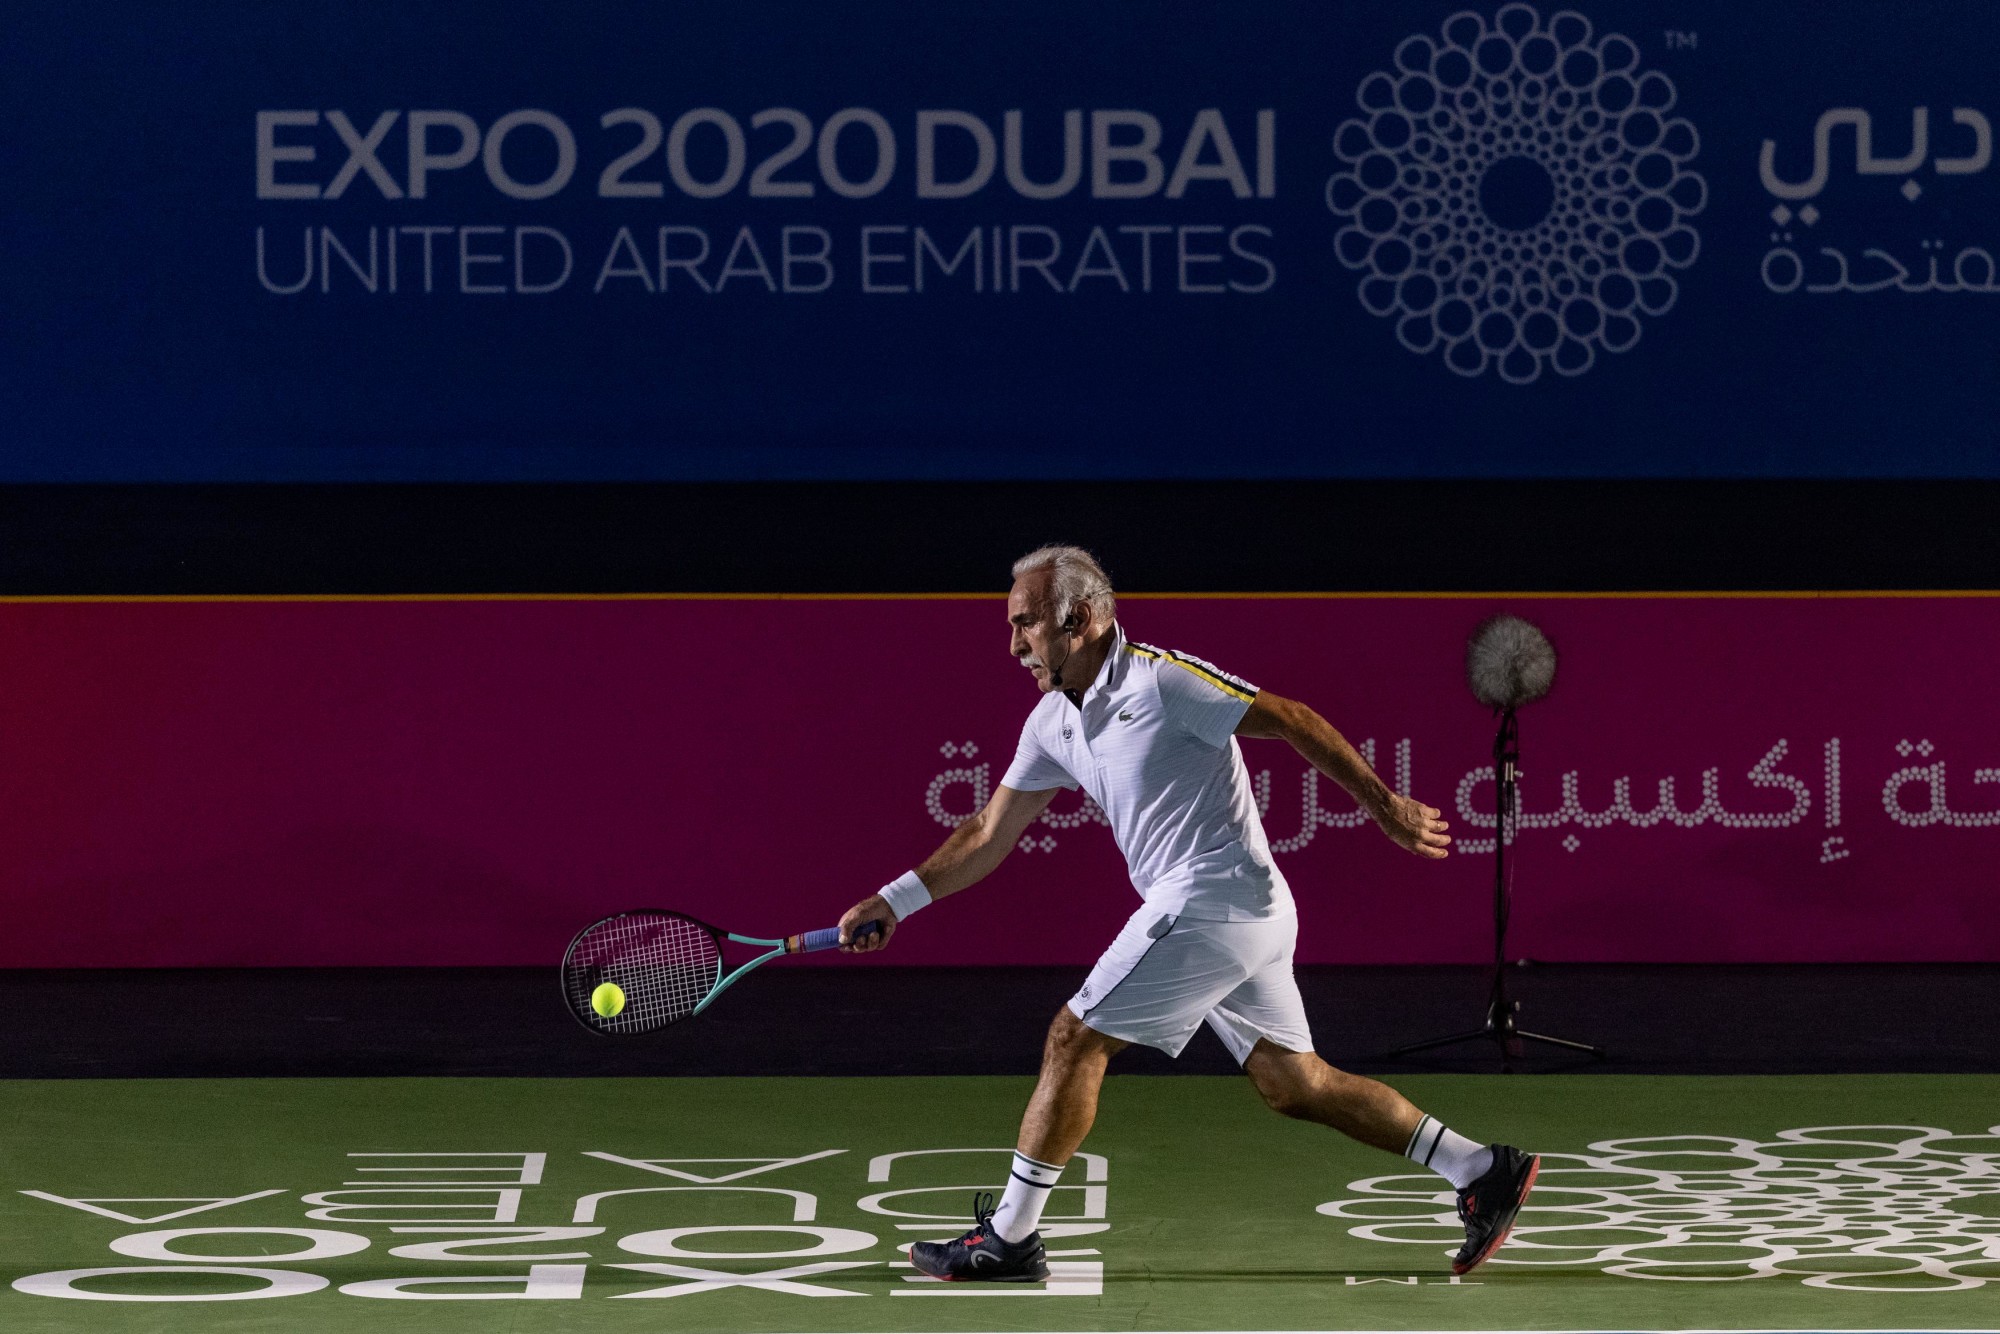 Tennis Player Mansour Bahrami in the Men-s Exhibition Match against Fabrice Santoro during World Tennis week at the Expo Sports Arena m52827